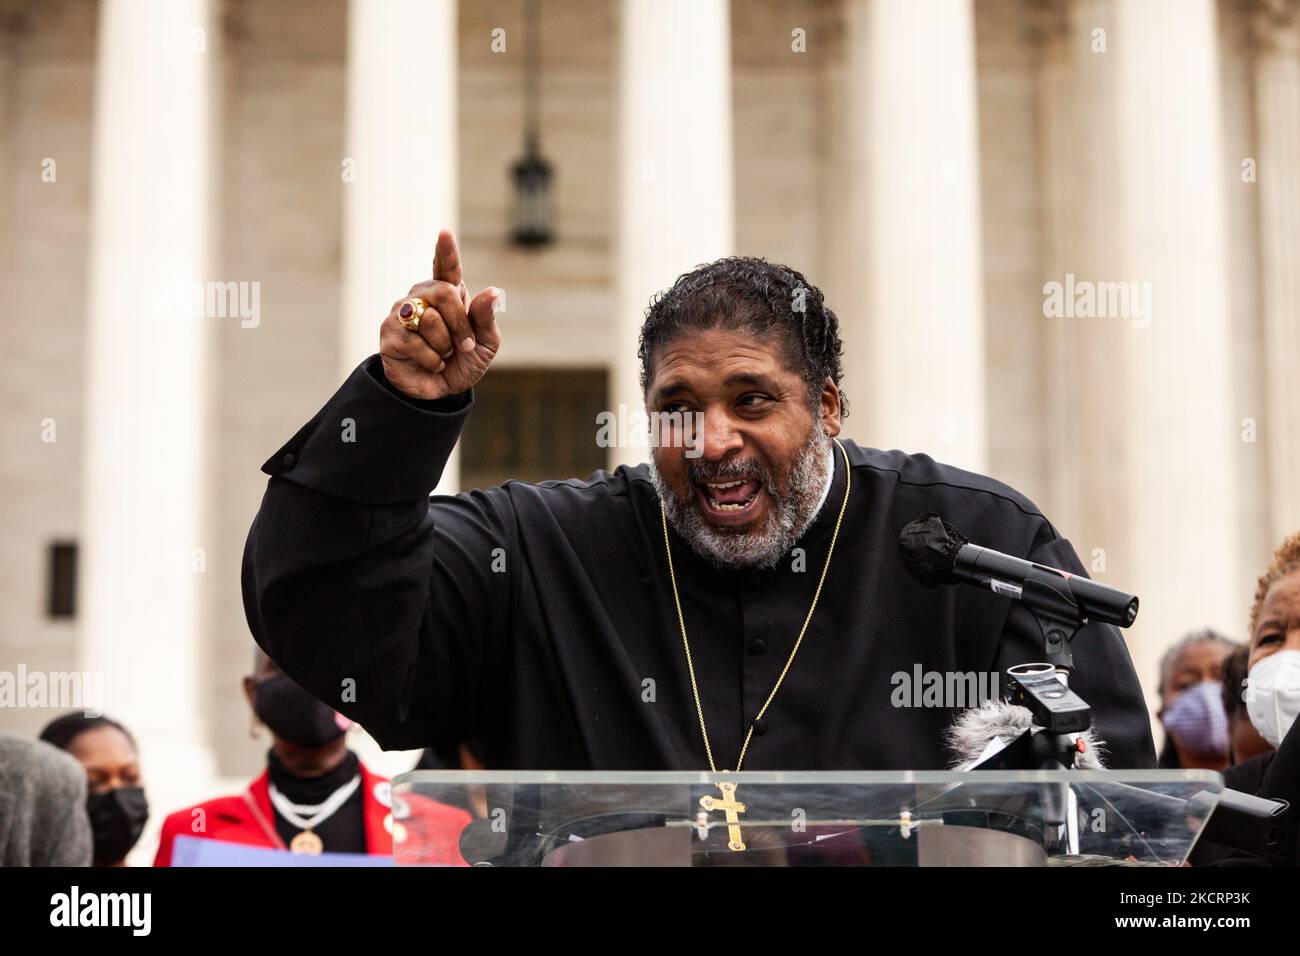 Bishop William Barber speaks during a rally at the Supreme Court for voting rights and economic justice. Protesters are demanding that Congress to pass legislation protecting the right to vote and providing economic assistance to Americans. Specifically, they want passage of the Freedom to Vote Act, the Build Back Better Act, and the Infrastructure Investment and Jobs Act. (Photo by Allison Bailey/NurPhoto) Stock Photo